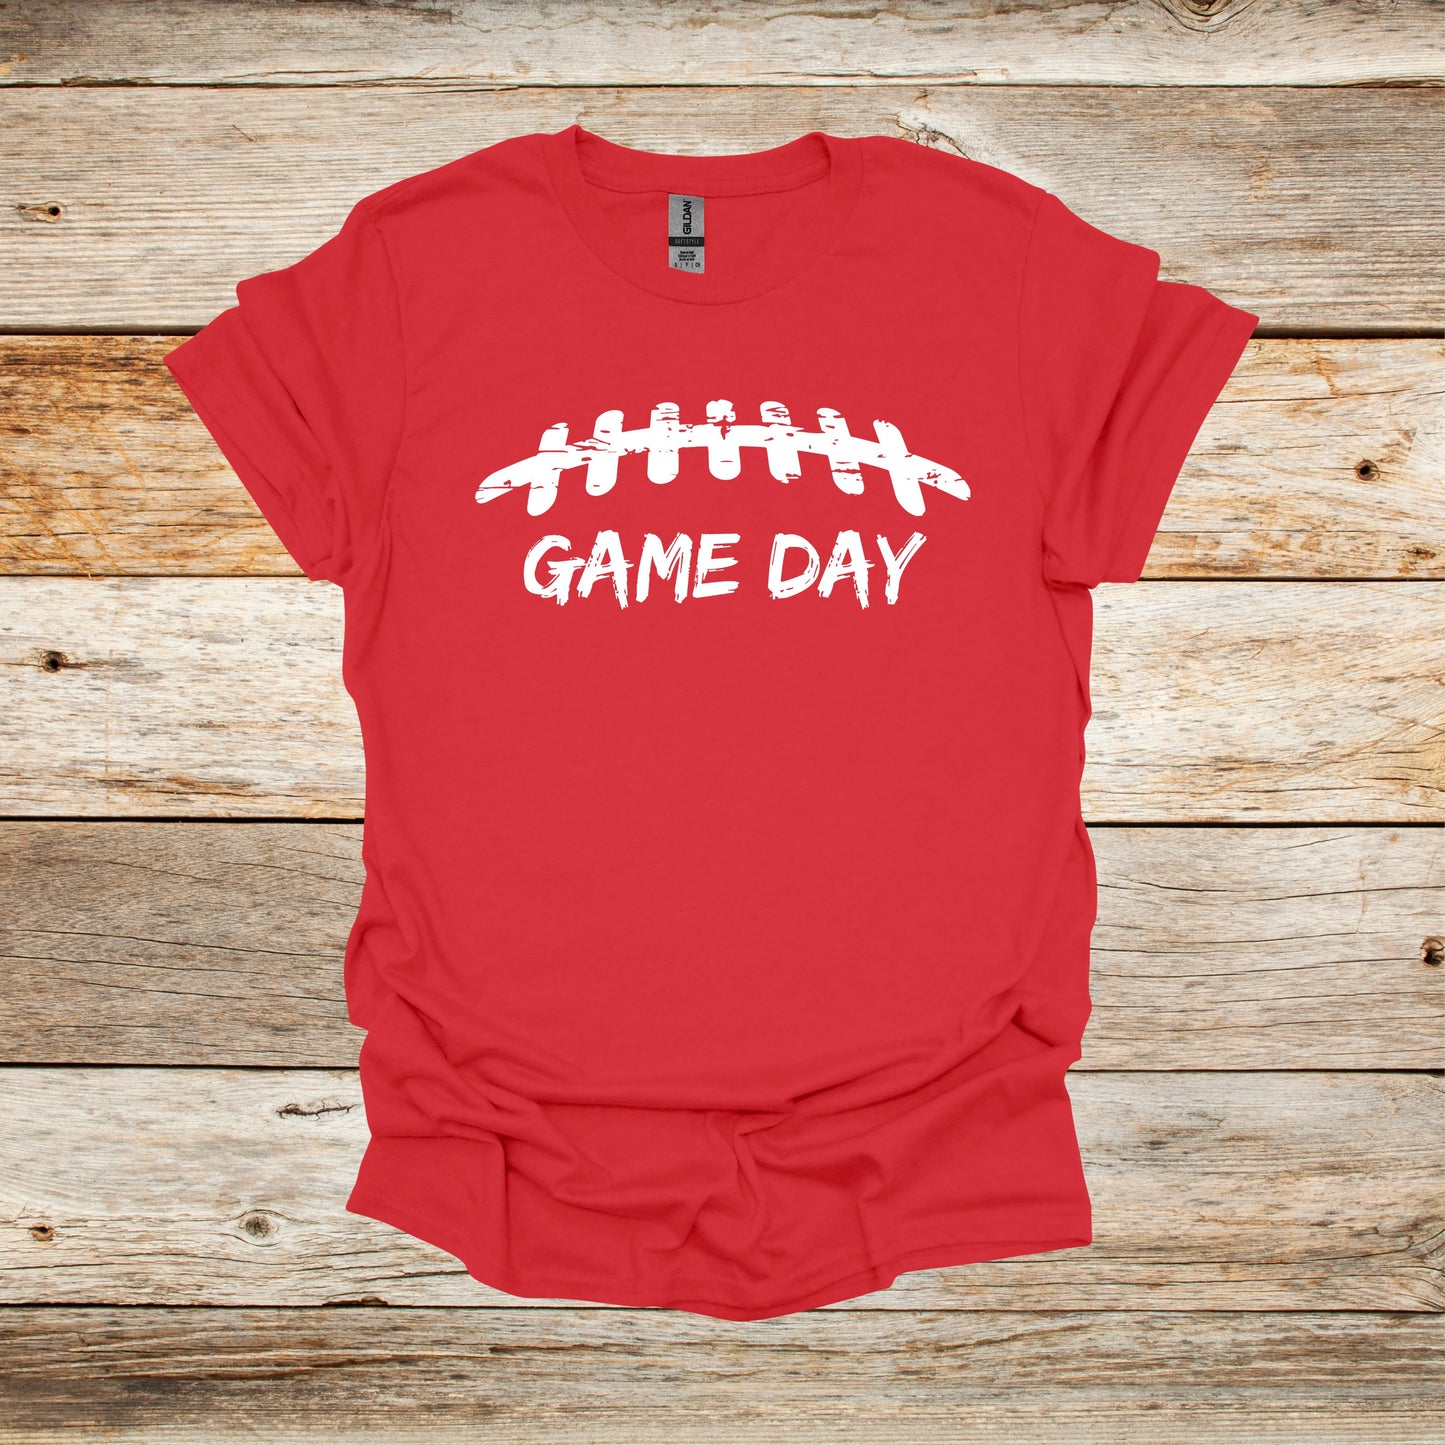 Football T-Shirt - Game Day Laces - Adult and Children's Tee Shirts - Game Day - Sports T-Shirts Graphic Avenue Red Adult Small 